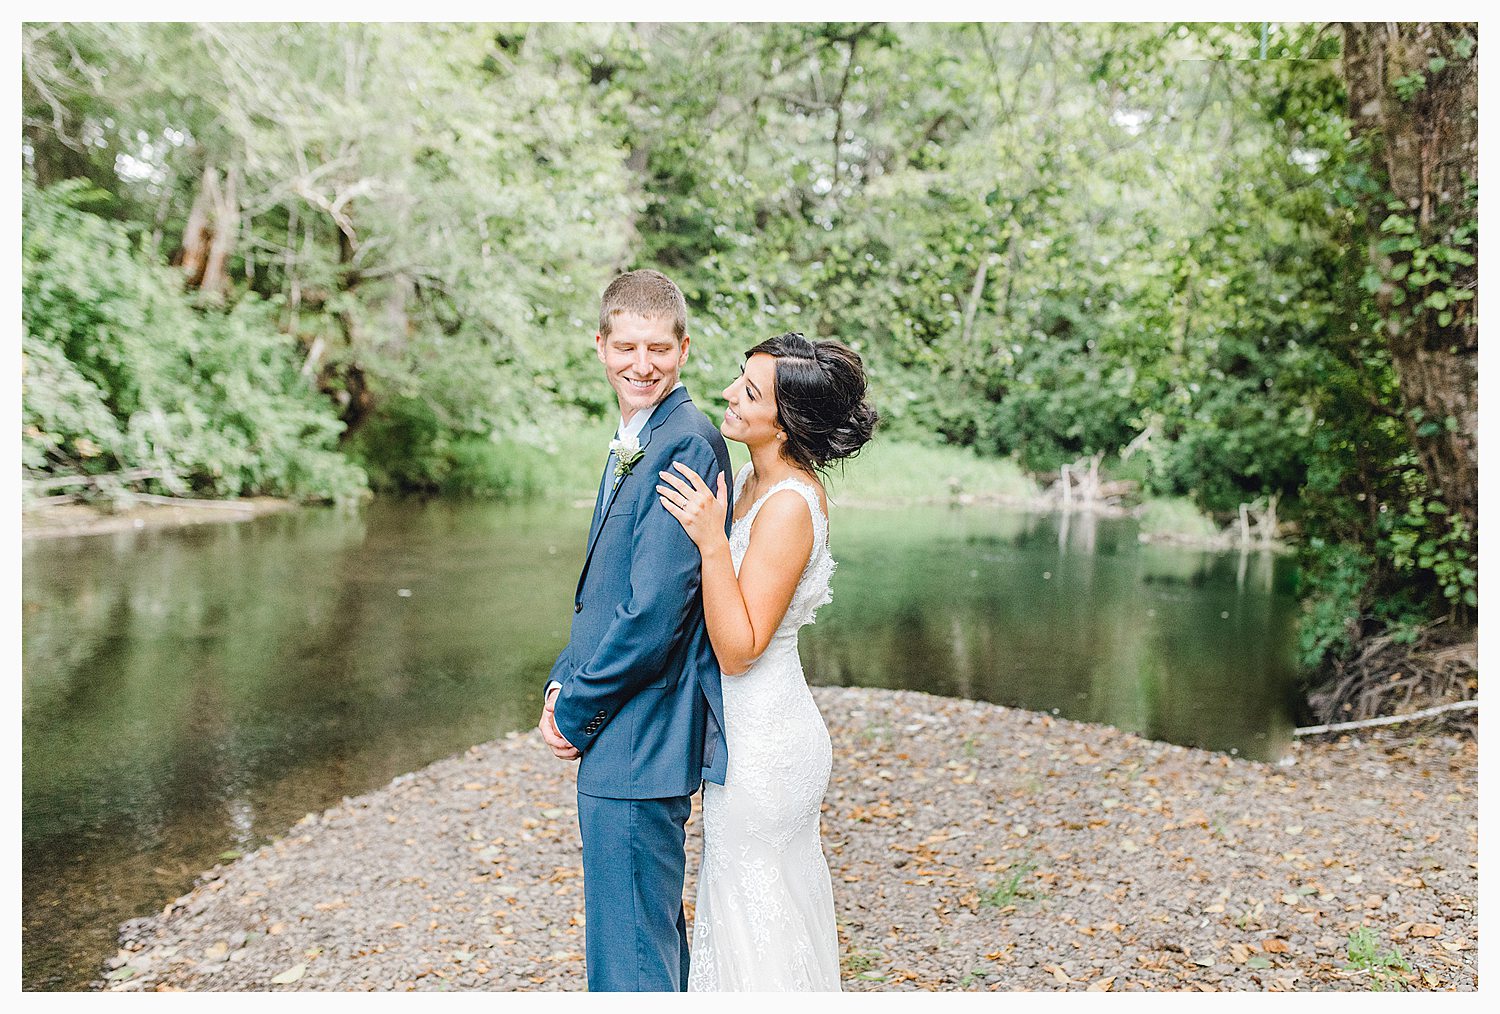 This beautiful lush green Pacific Northwest intimate wedding was a dream, photographed by Emma Rose Company.  From the gorgeous florals by Rhodesia Floral to the succulents and cute wood signs throughout, you will feel inspired._0026.jpg